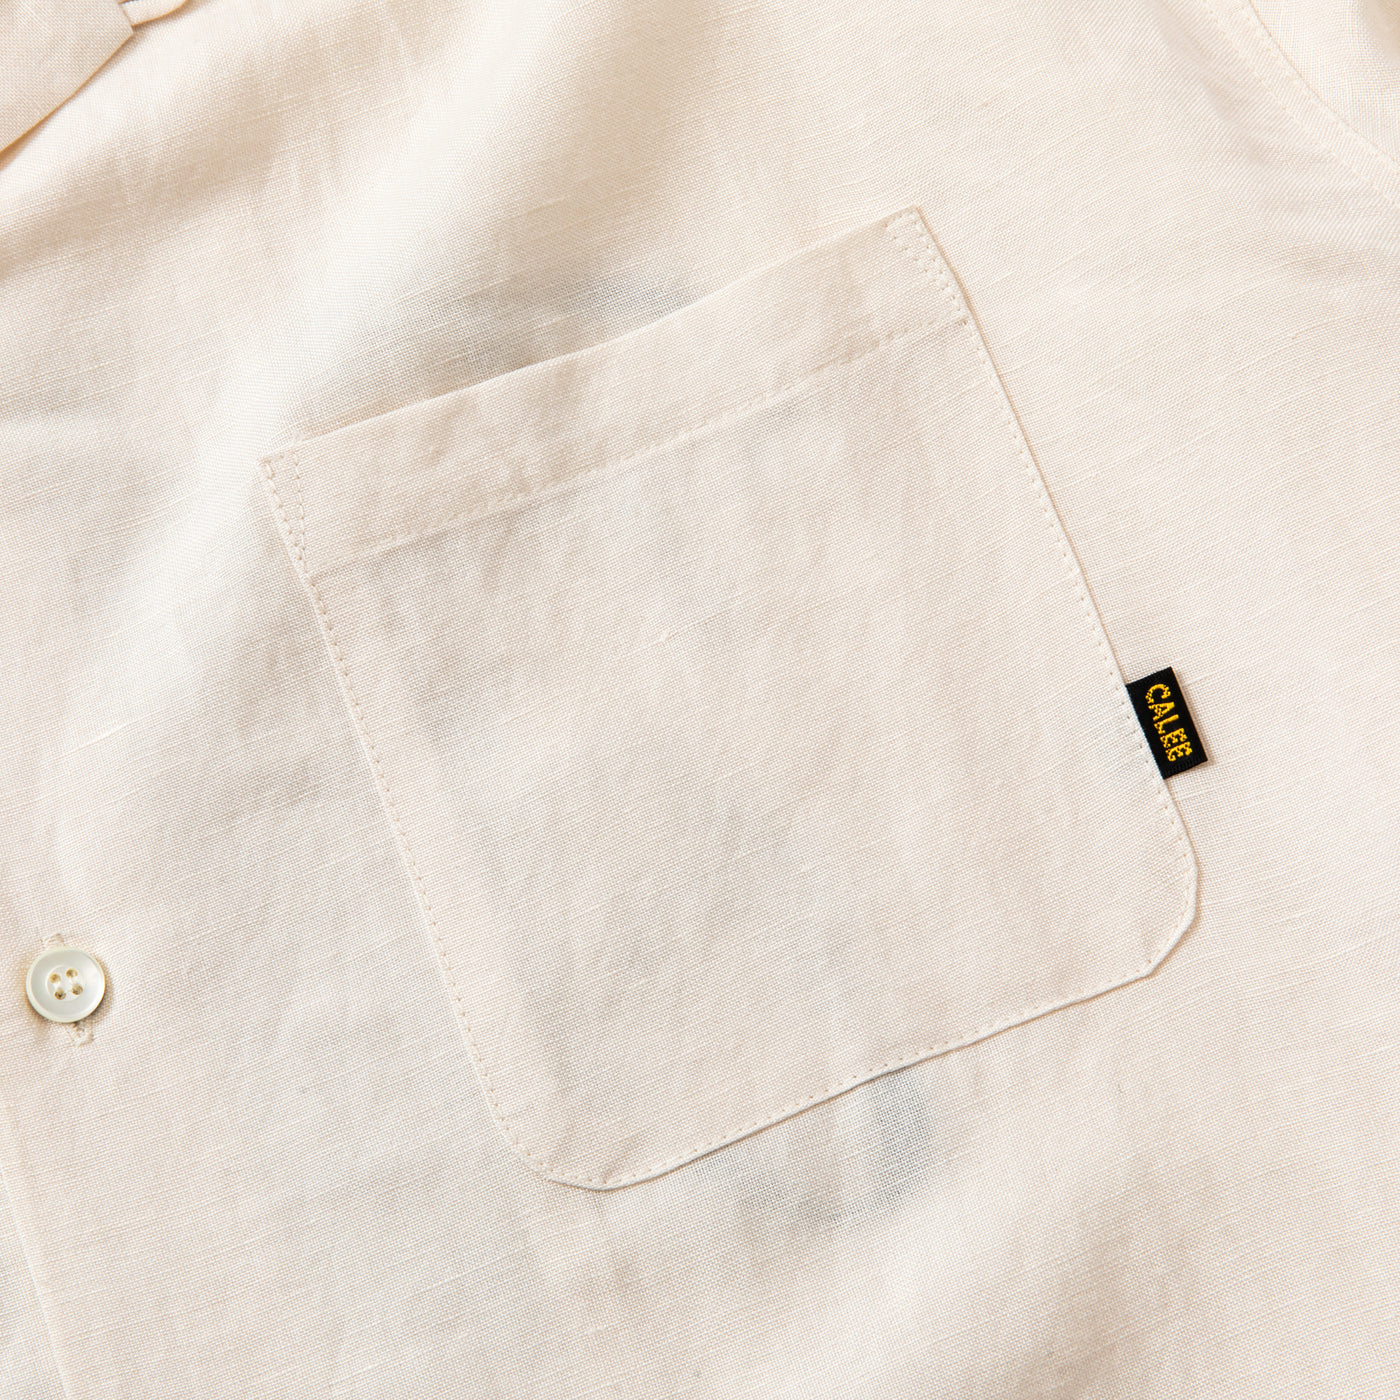 R/L FOL EMBROIDERY S/S SHIRT